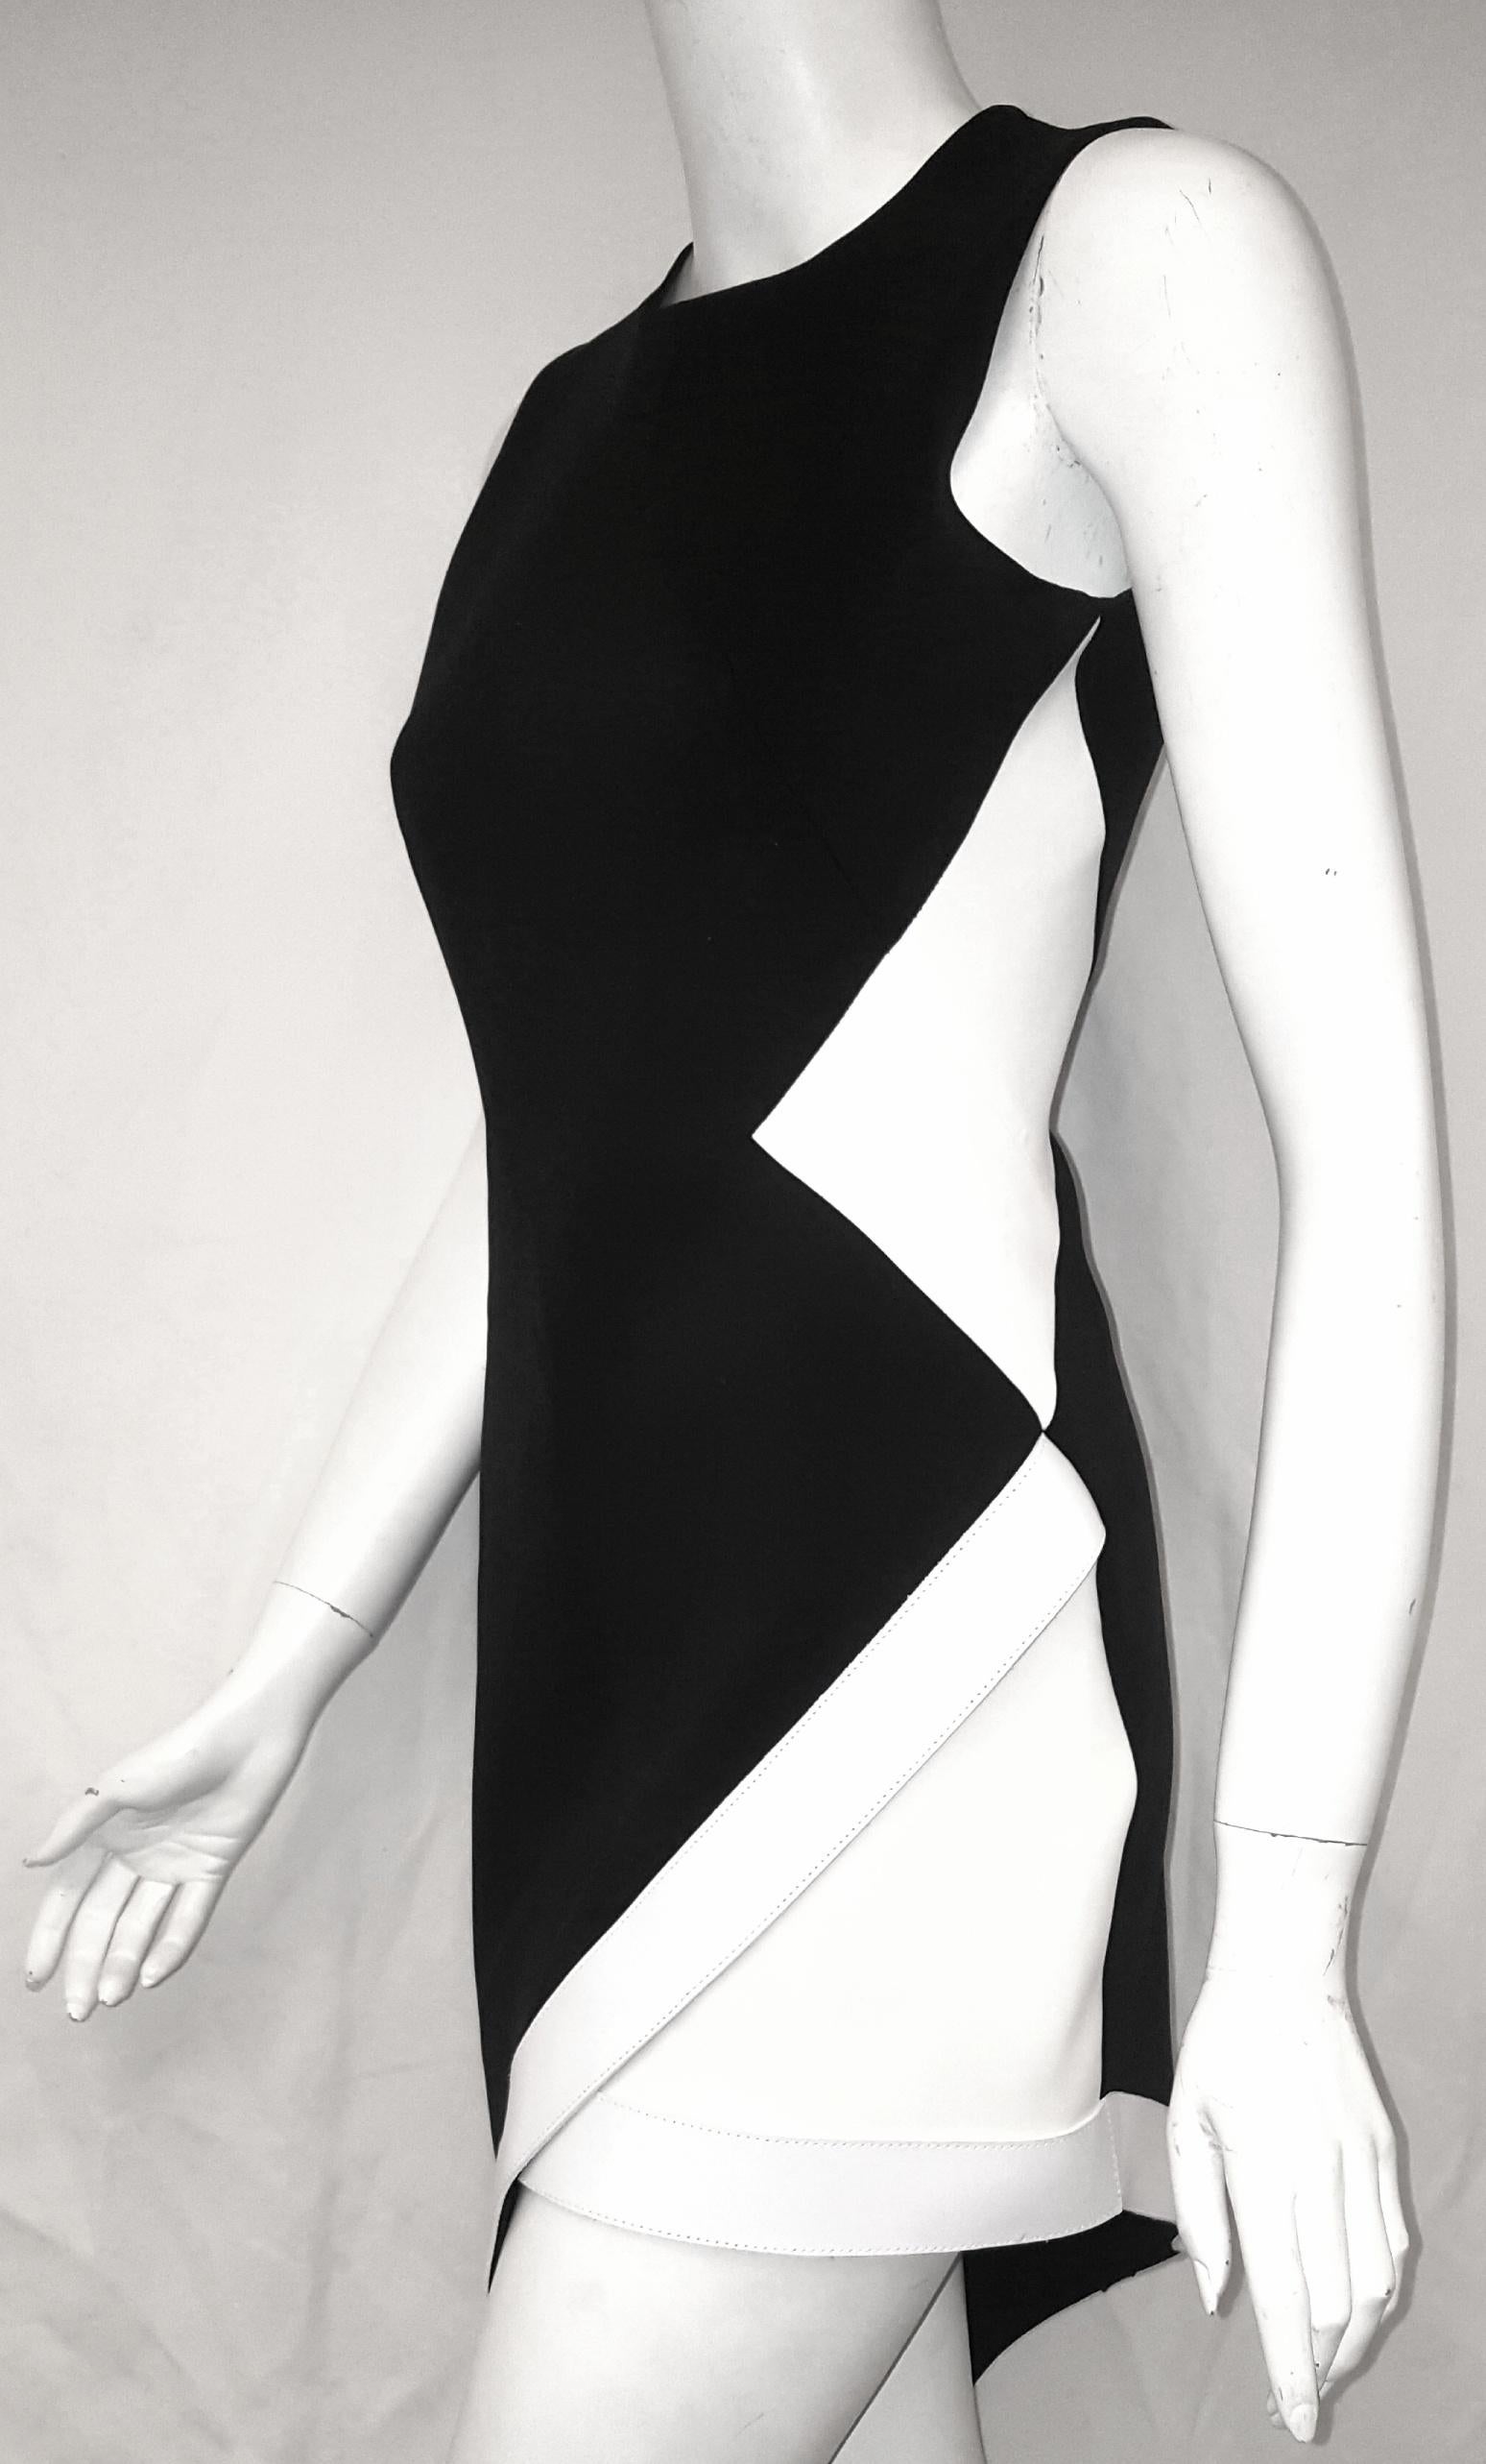 David Koma black & white viscose and leather trim dress from the spring/summer 2014 collection was a standout in a Japanese inspired collection of sharp tailored dresses.  David Koma commented that he was moved by the mysterious and unusual Japanese